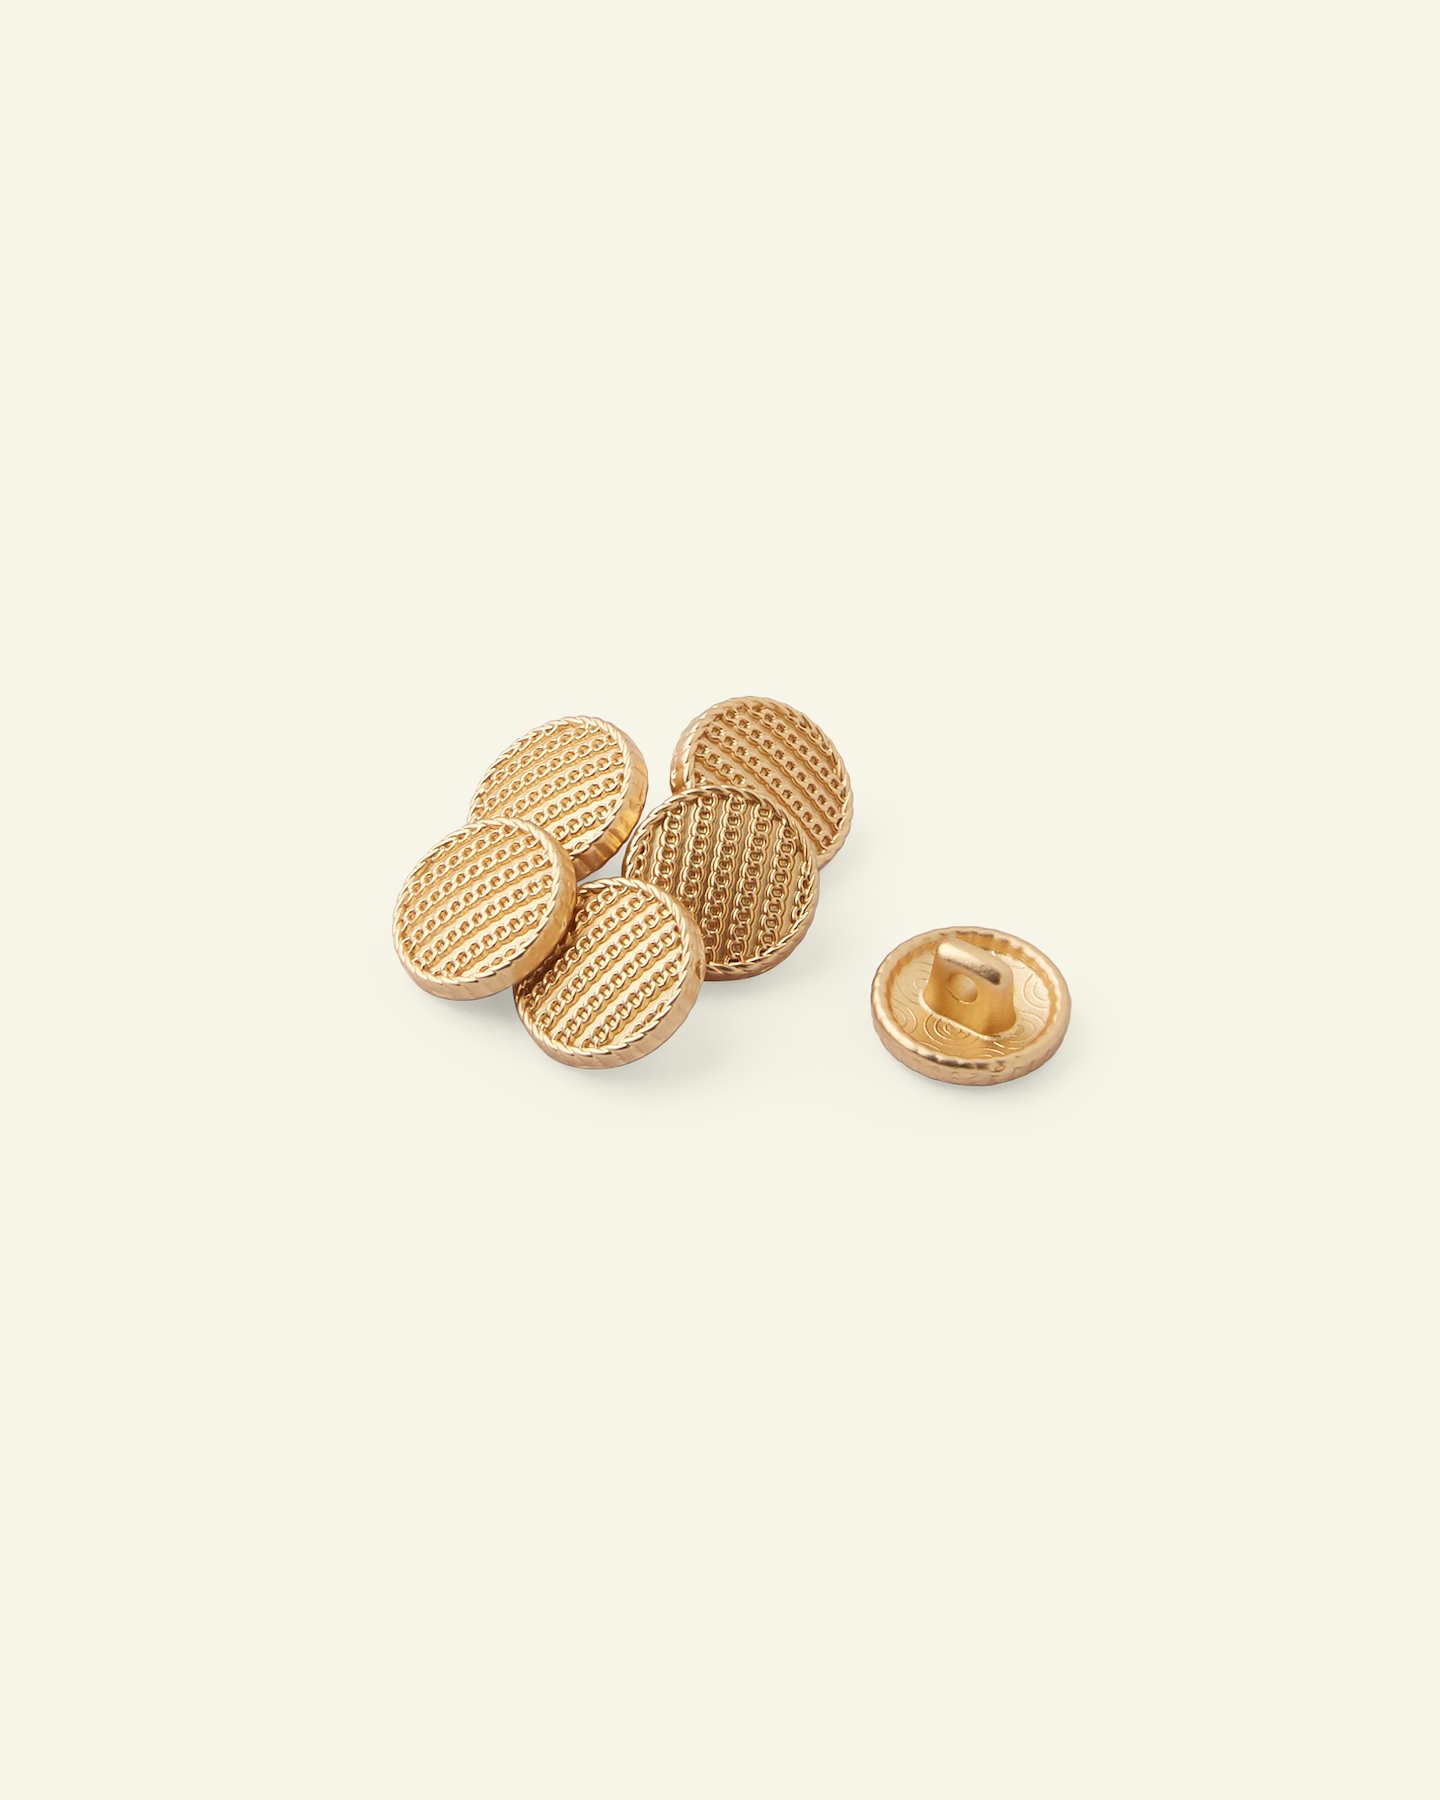 Leekyer 1.1 Inch Large Buttons 4 Hole Coffee Color with Spot Round Flatback  Resin Buttons for Sewing Tailor Crafts Coats Handemade Decorate Children's